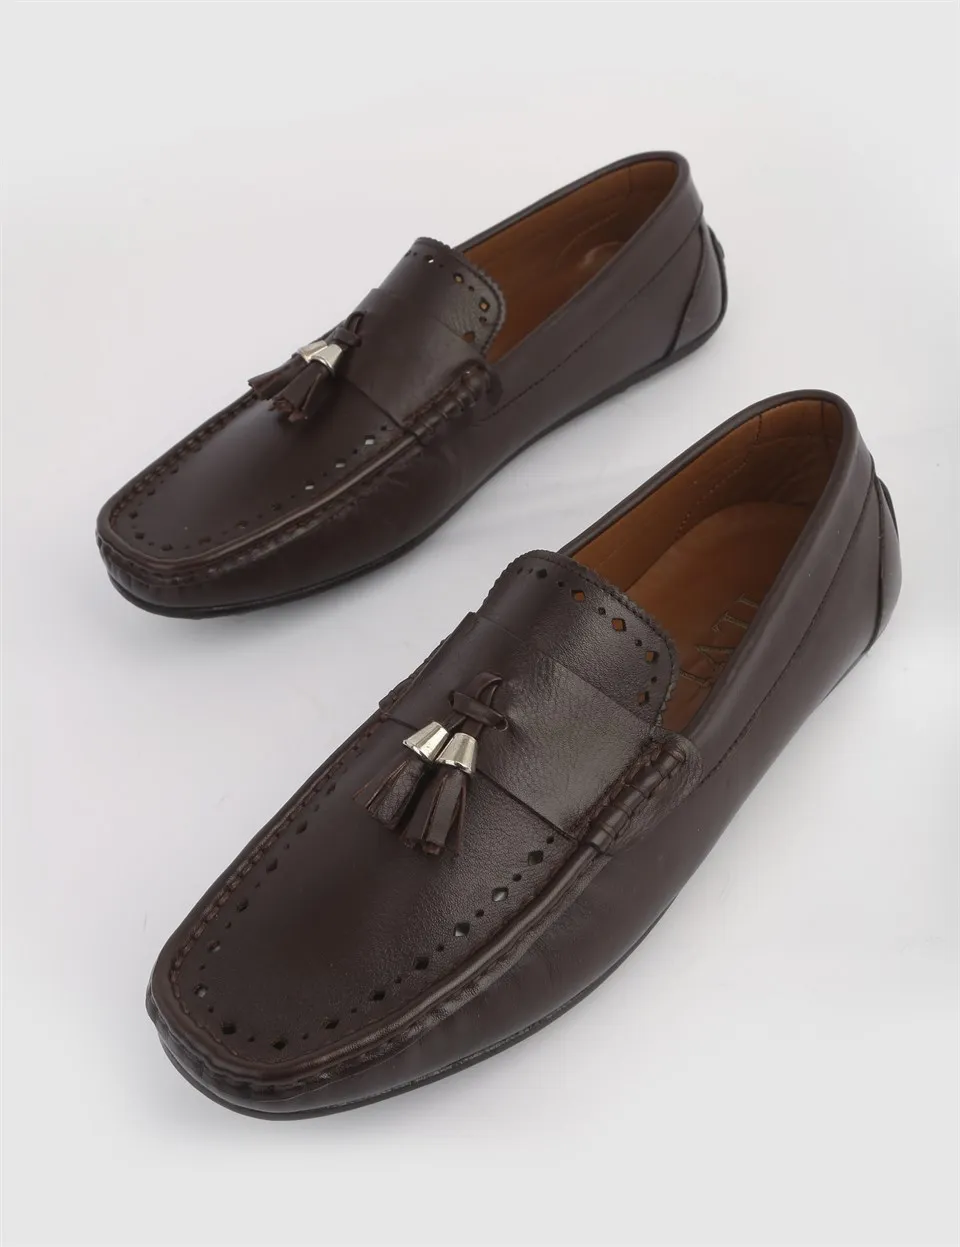 

ILVi-Genuine Leather Handmade Lonnie Brown Leather Men's Moccasin Men Shoes 2021 Spring/Summer